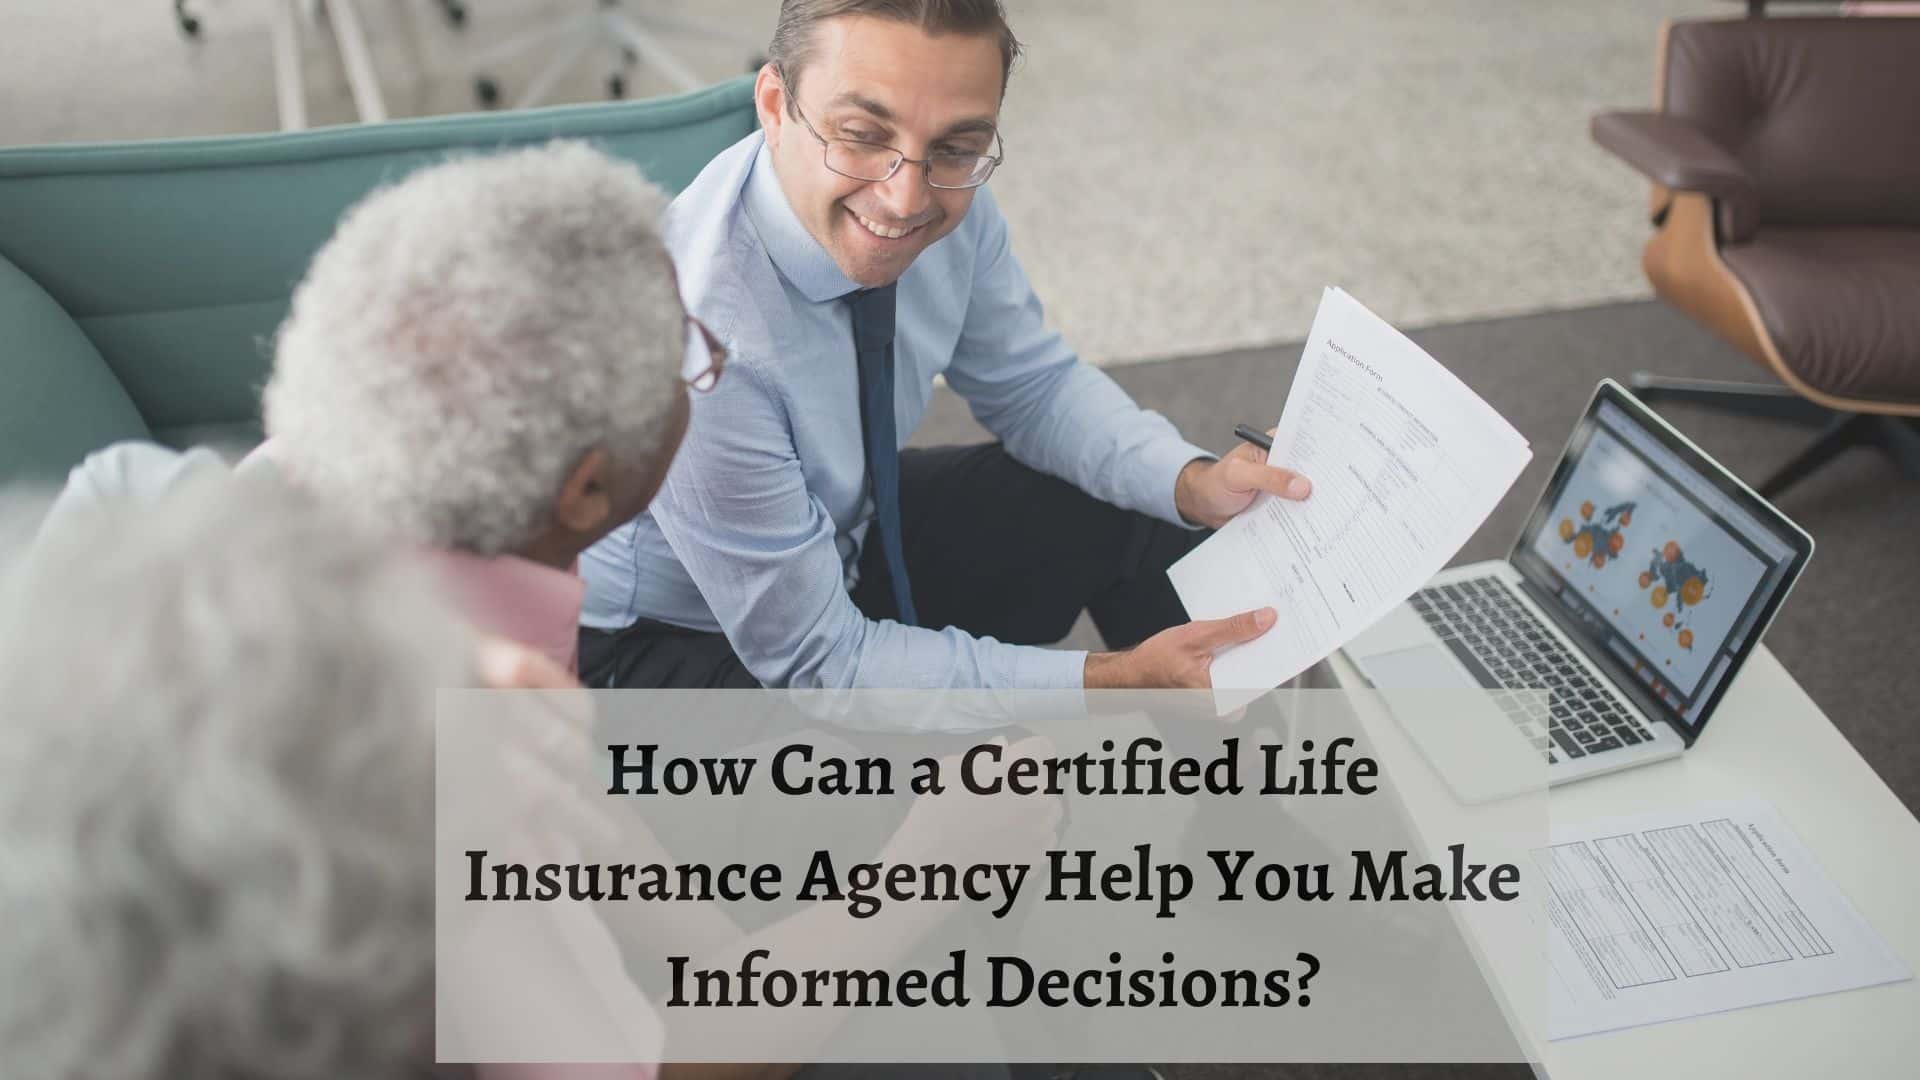 You are currently viewing How Can a Certified Life Insurance Agency Help You Make Informed Decisions?